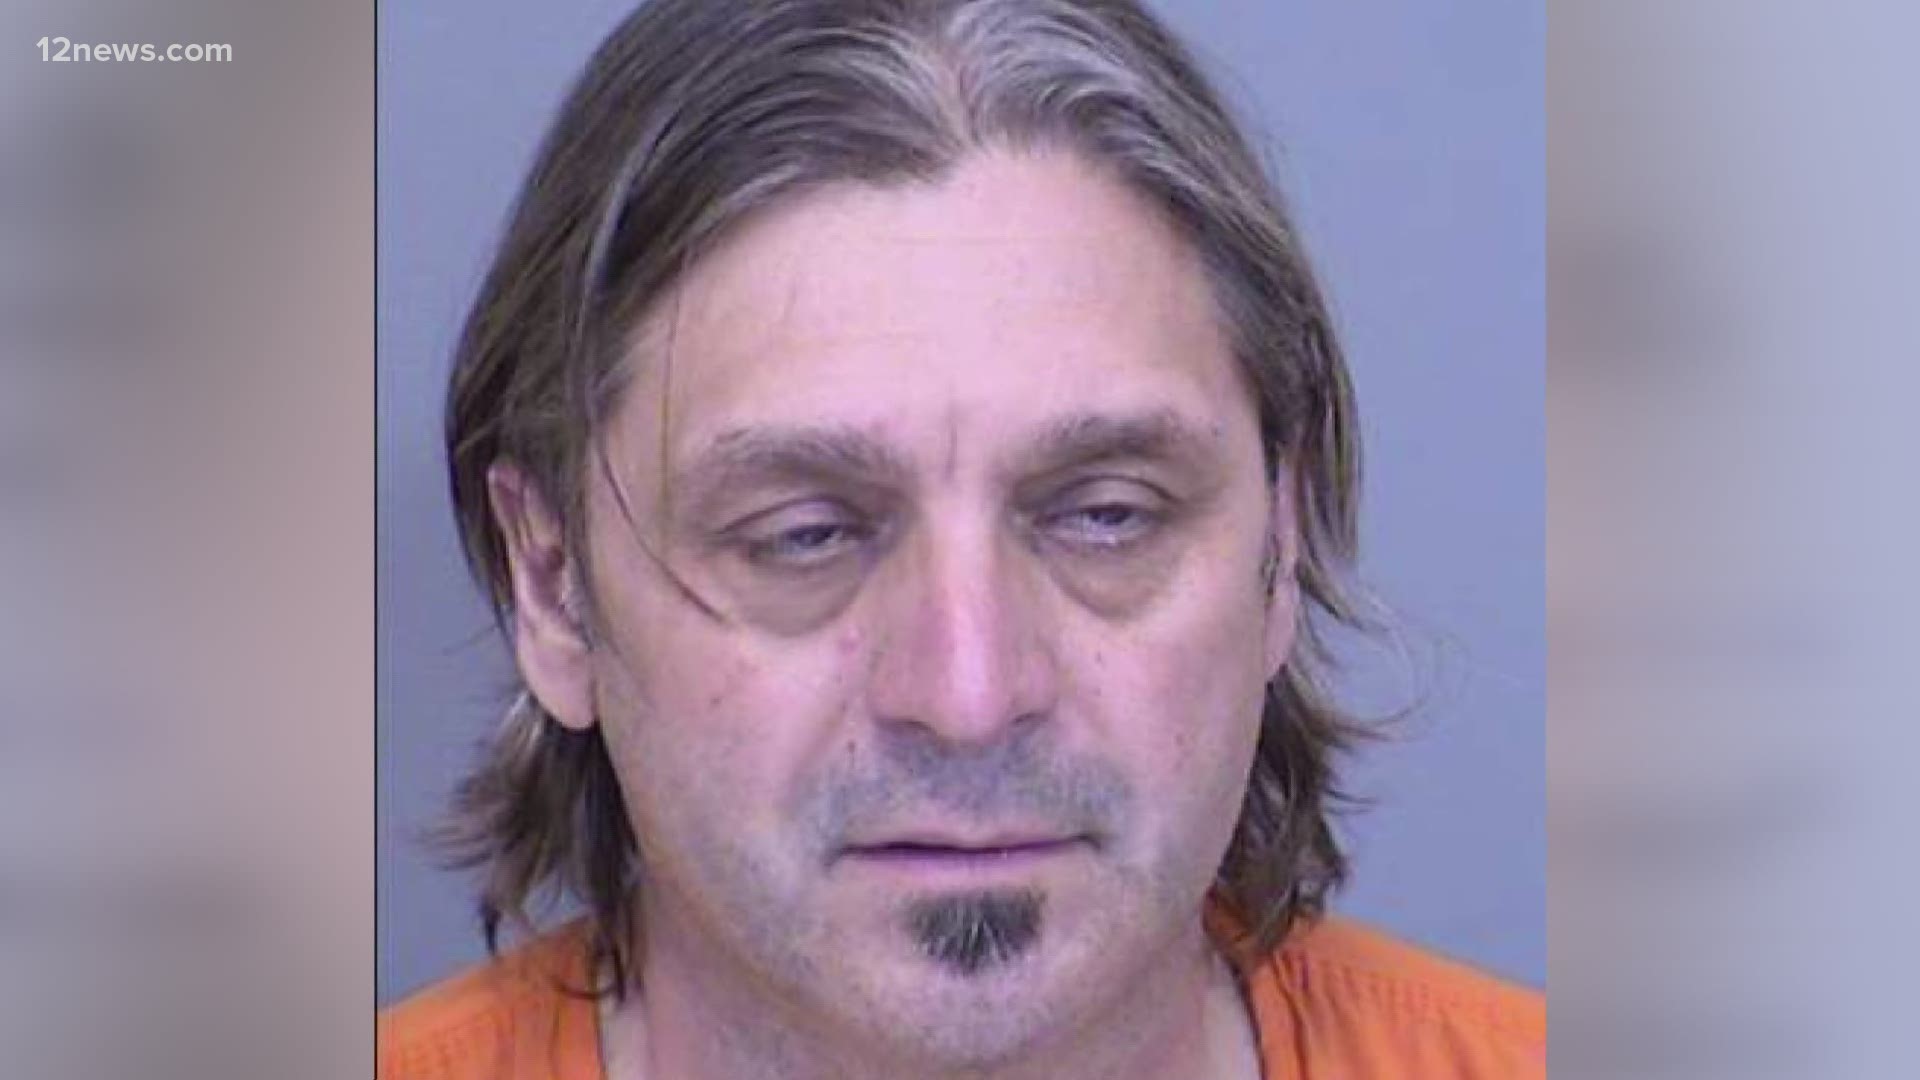 Court documents say 52-year-old Nicolae Horga assaulted a patient at an unnamed Phoenix care facility on March 19th.